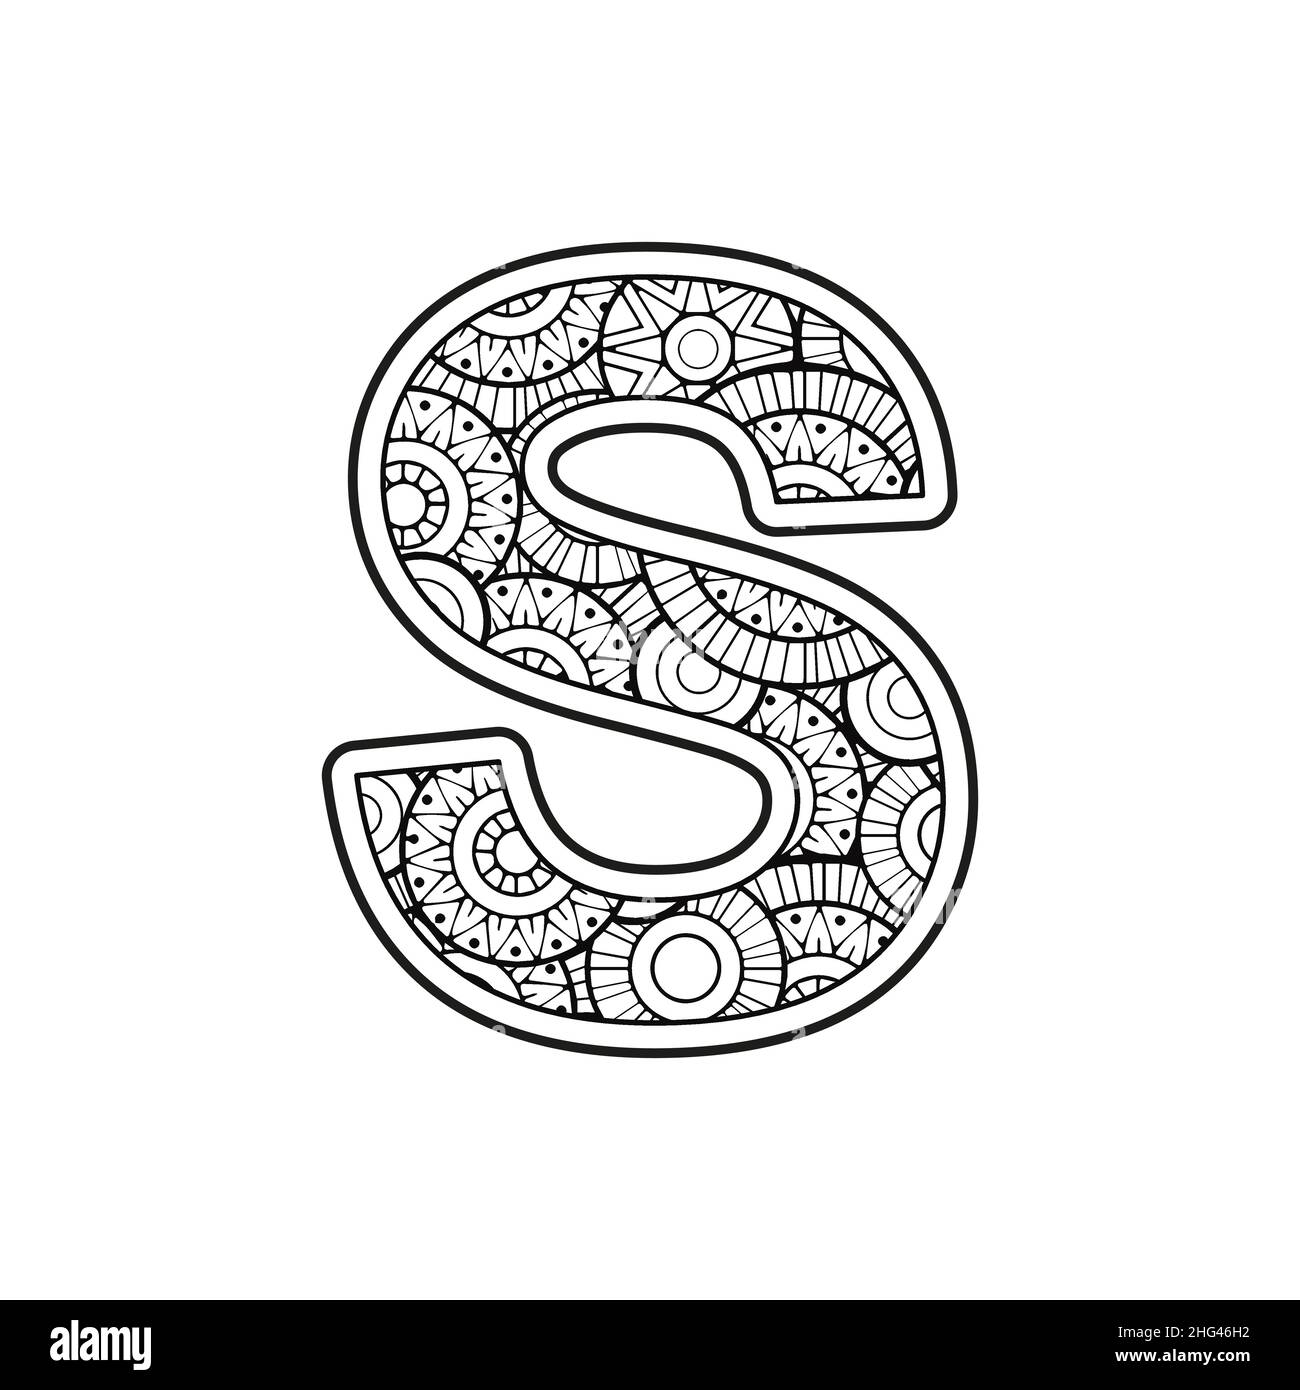 Coloring page for adult. Contour Capital English Letter S with background a  mandala pattern Stock Vector Image & Art - Alamy